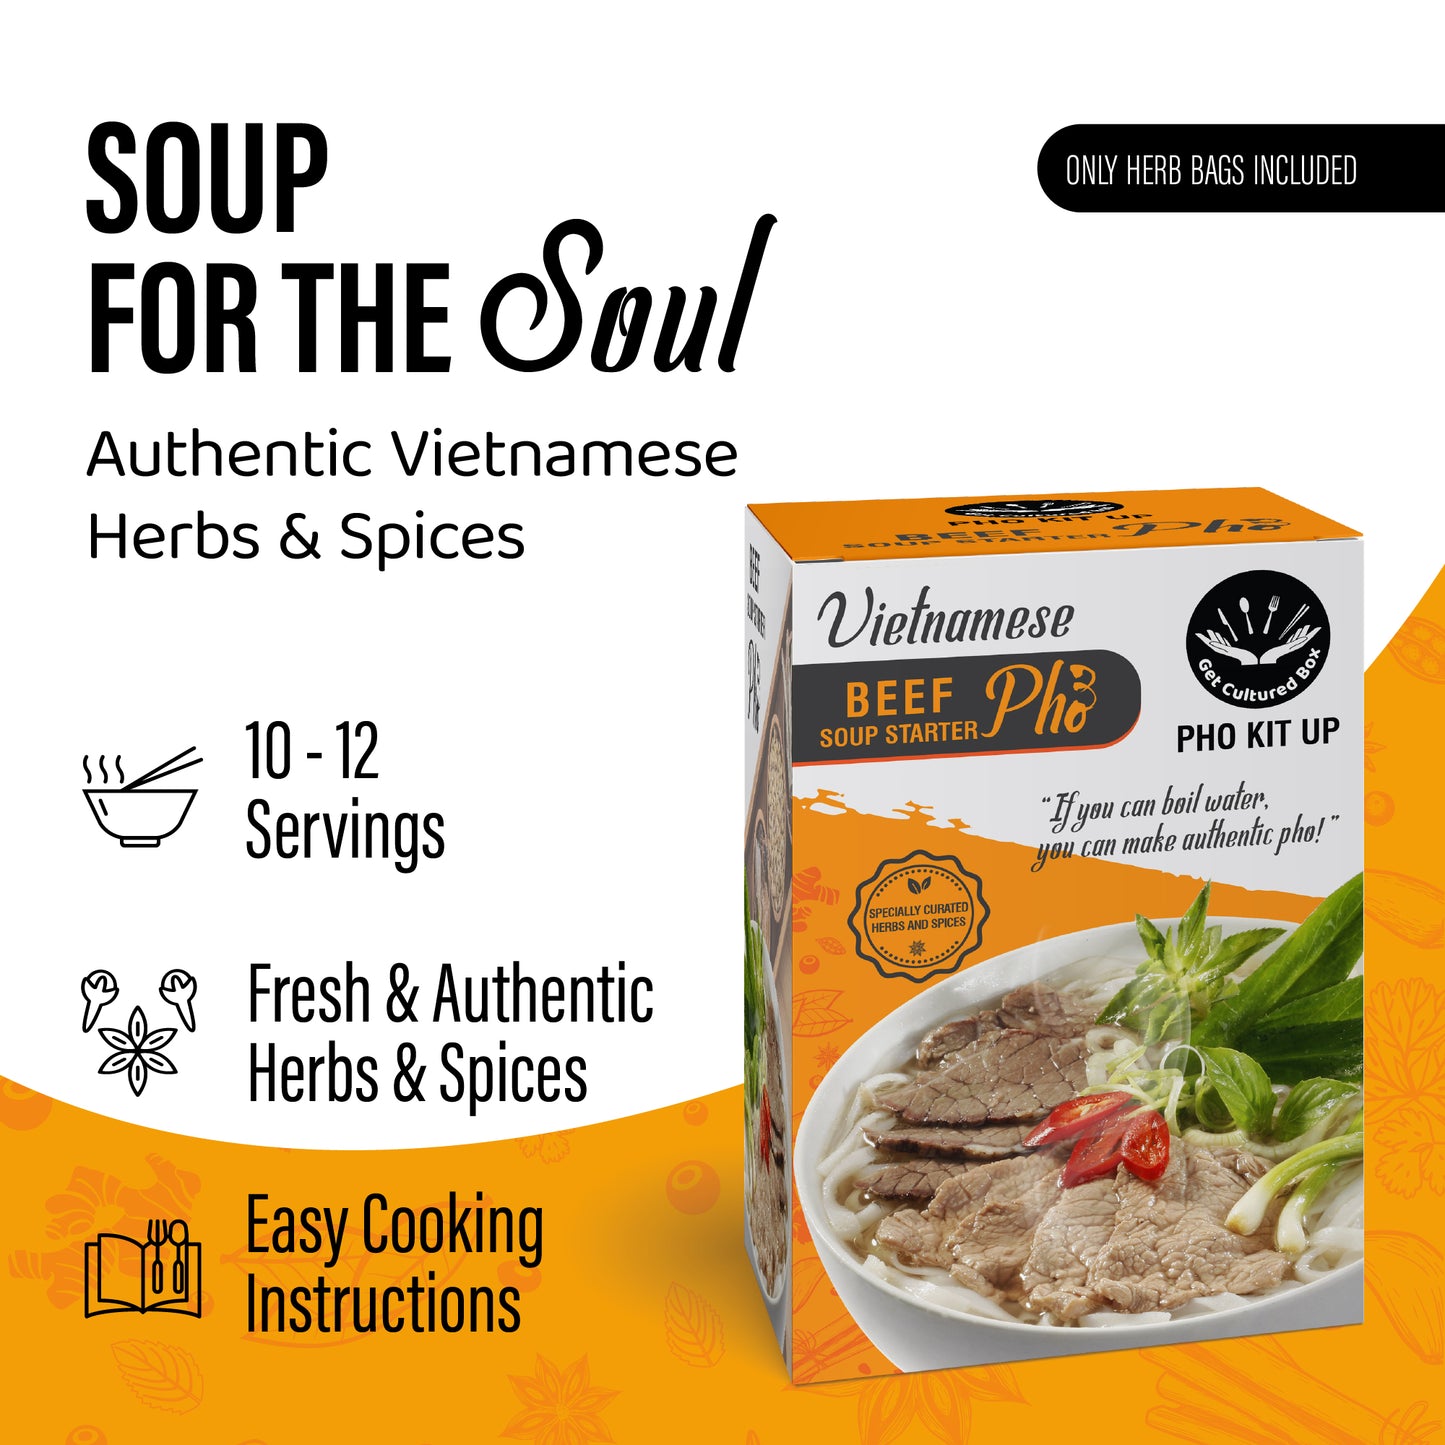 Beef Phở Herb Bags (set of 2)